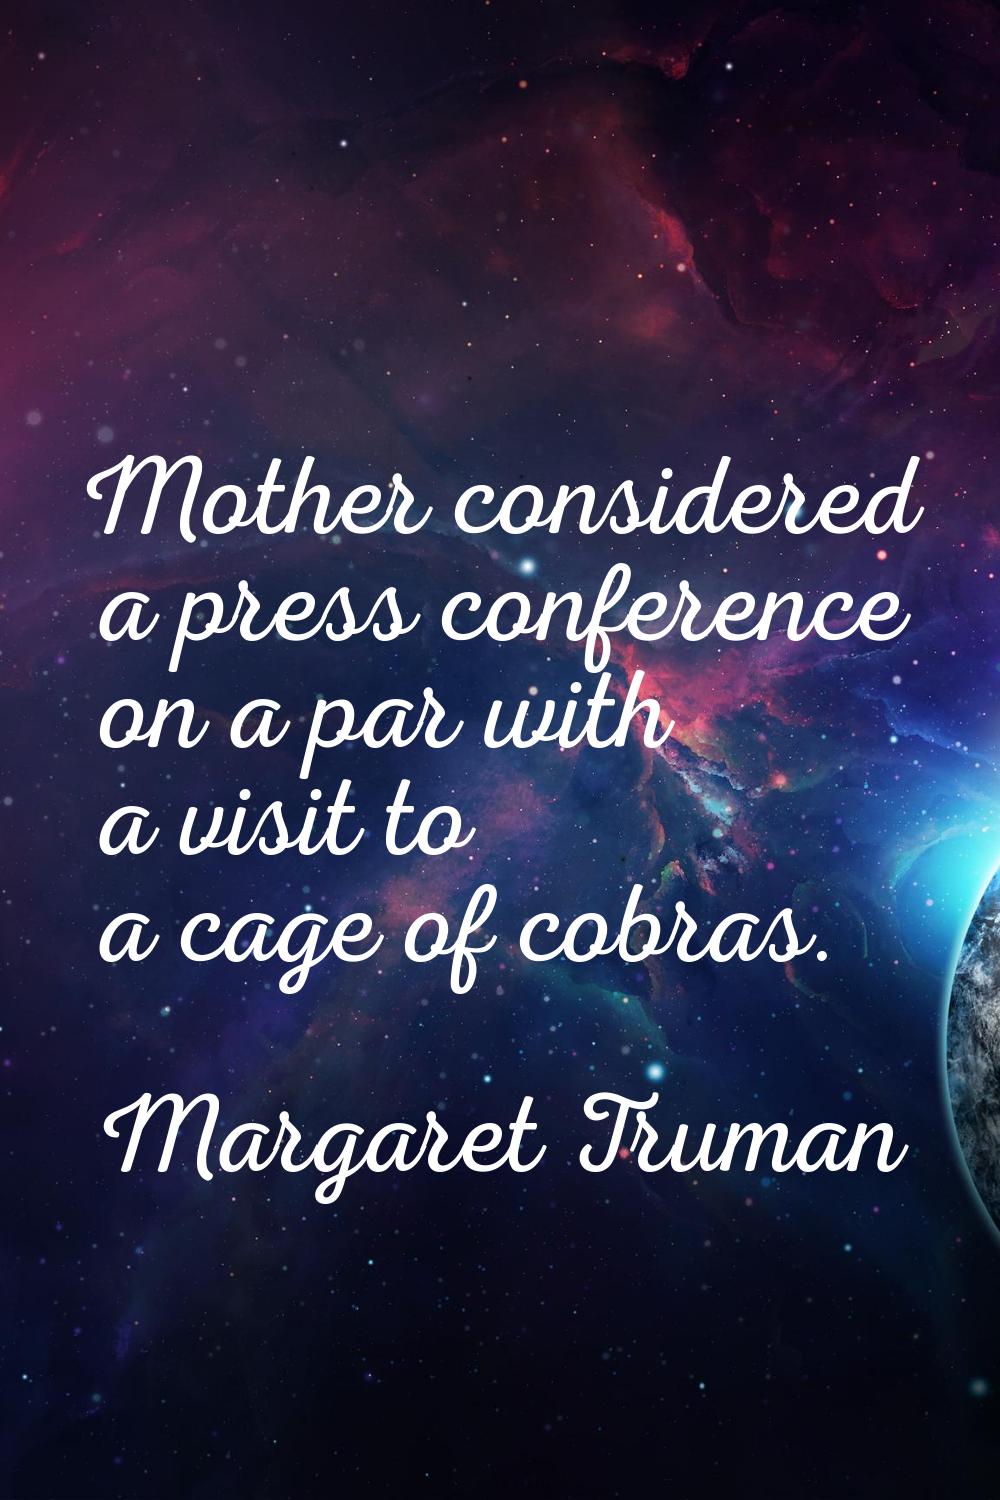 Mother considered a press conference on a par with a visit to a cage of cobras.